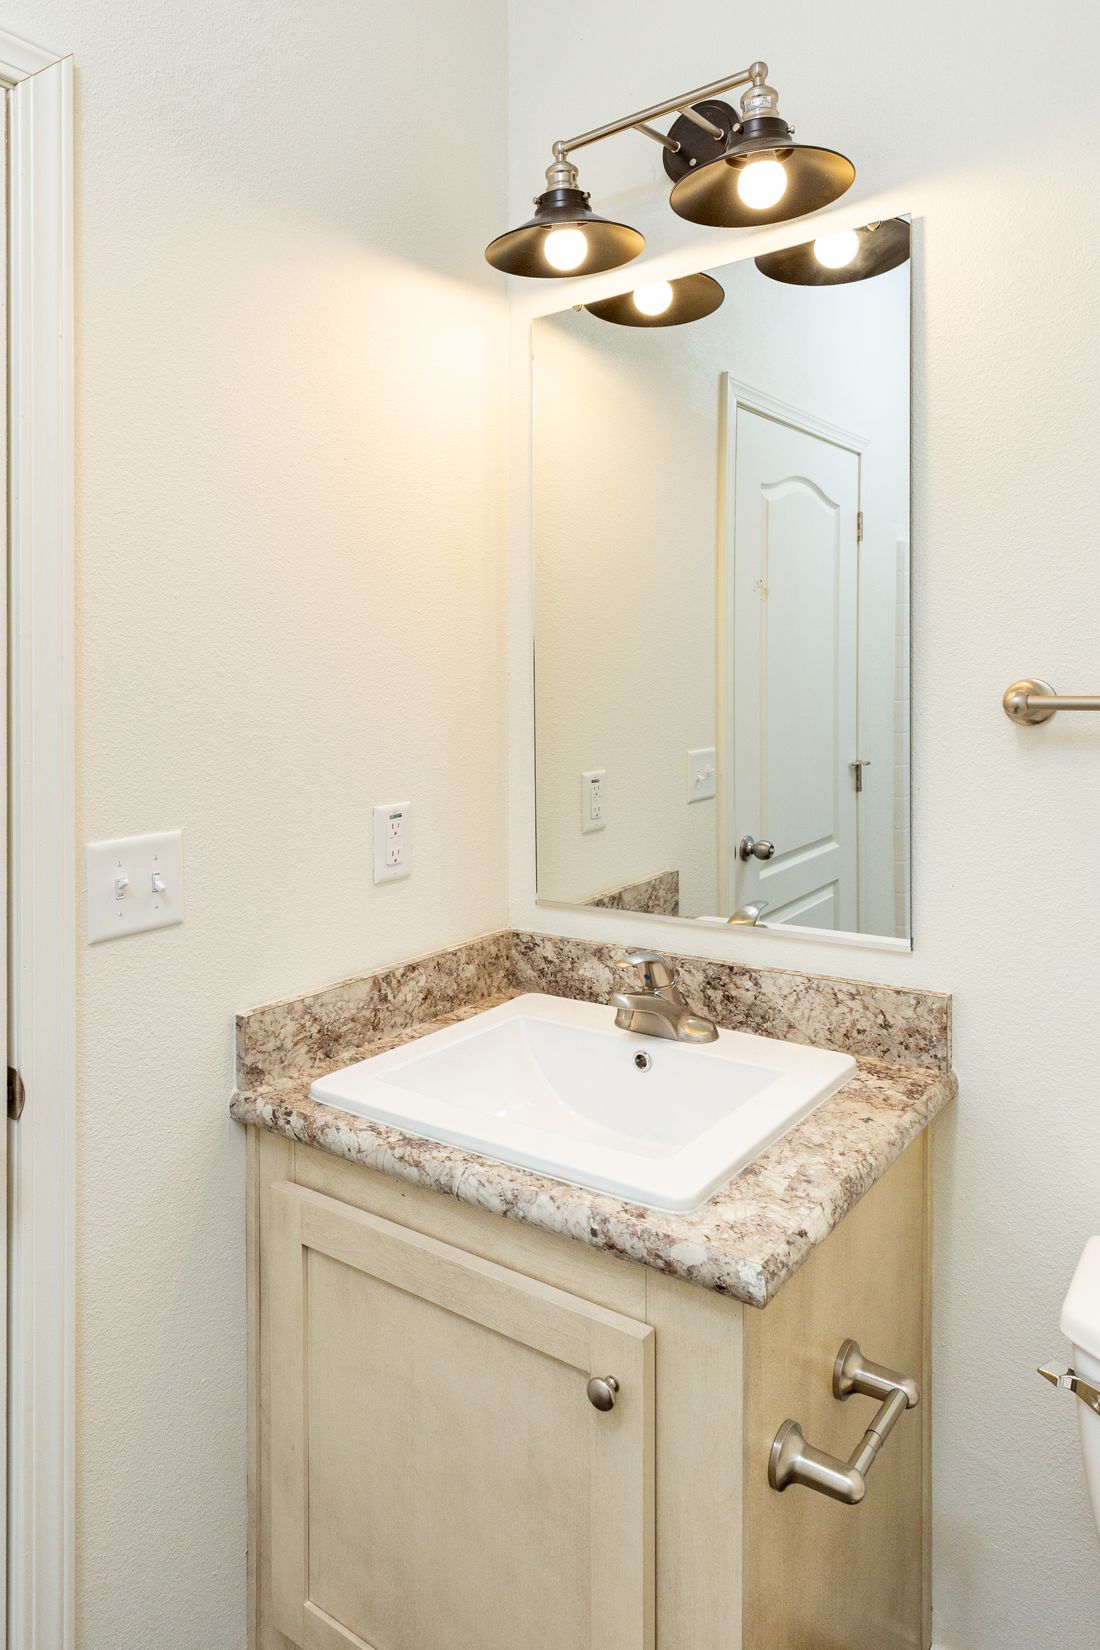 The 2017 COLUMBIA RIVER Guest Bathroom. This Manufactured Mobile Home features 3 bedrooms and 2 baths.